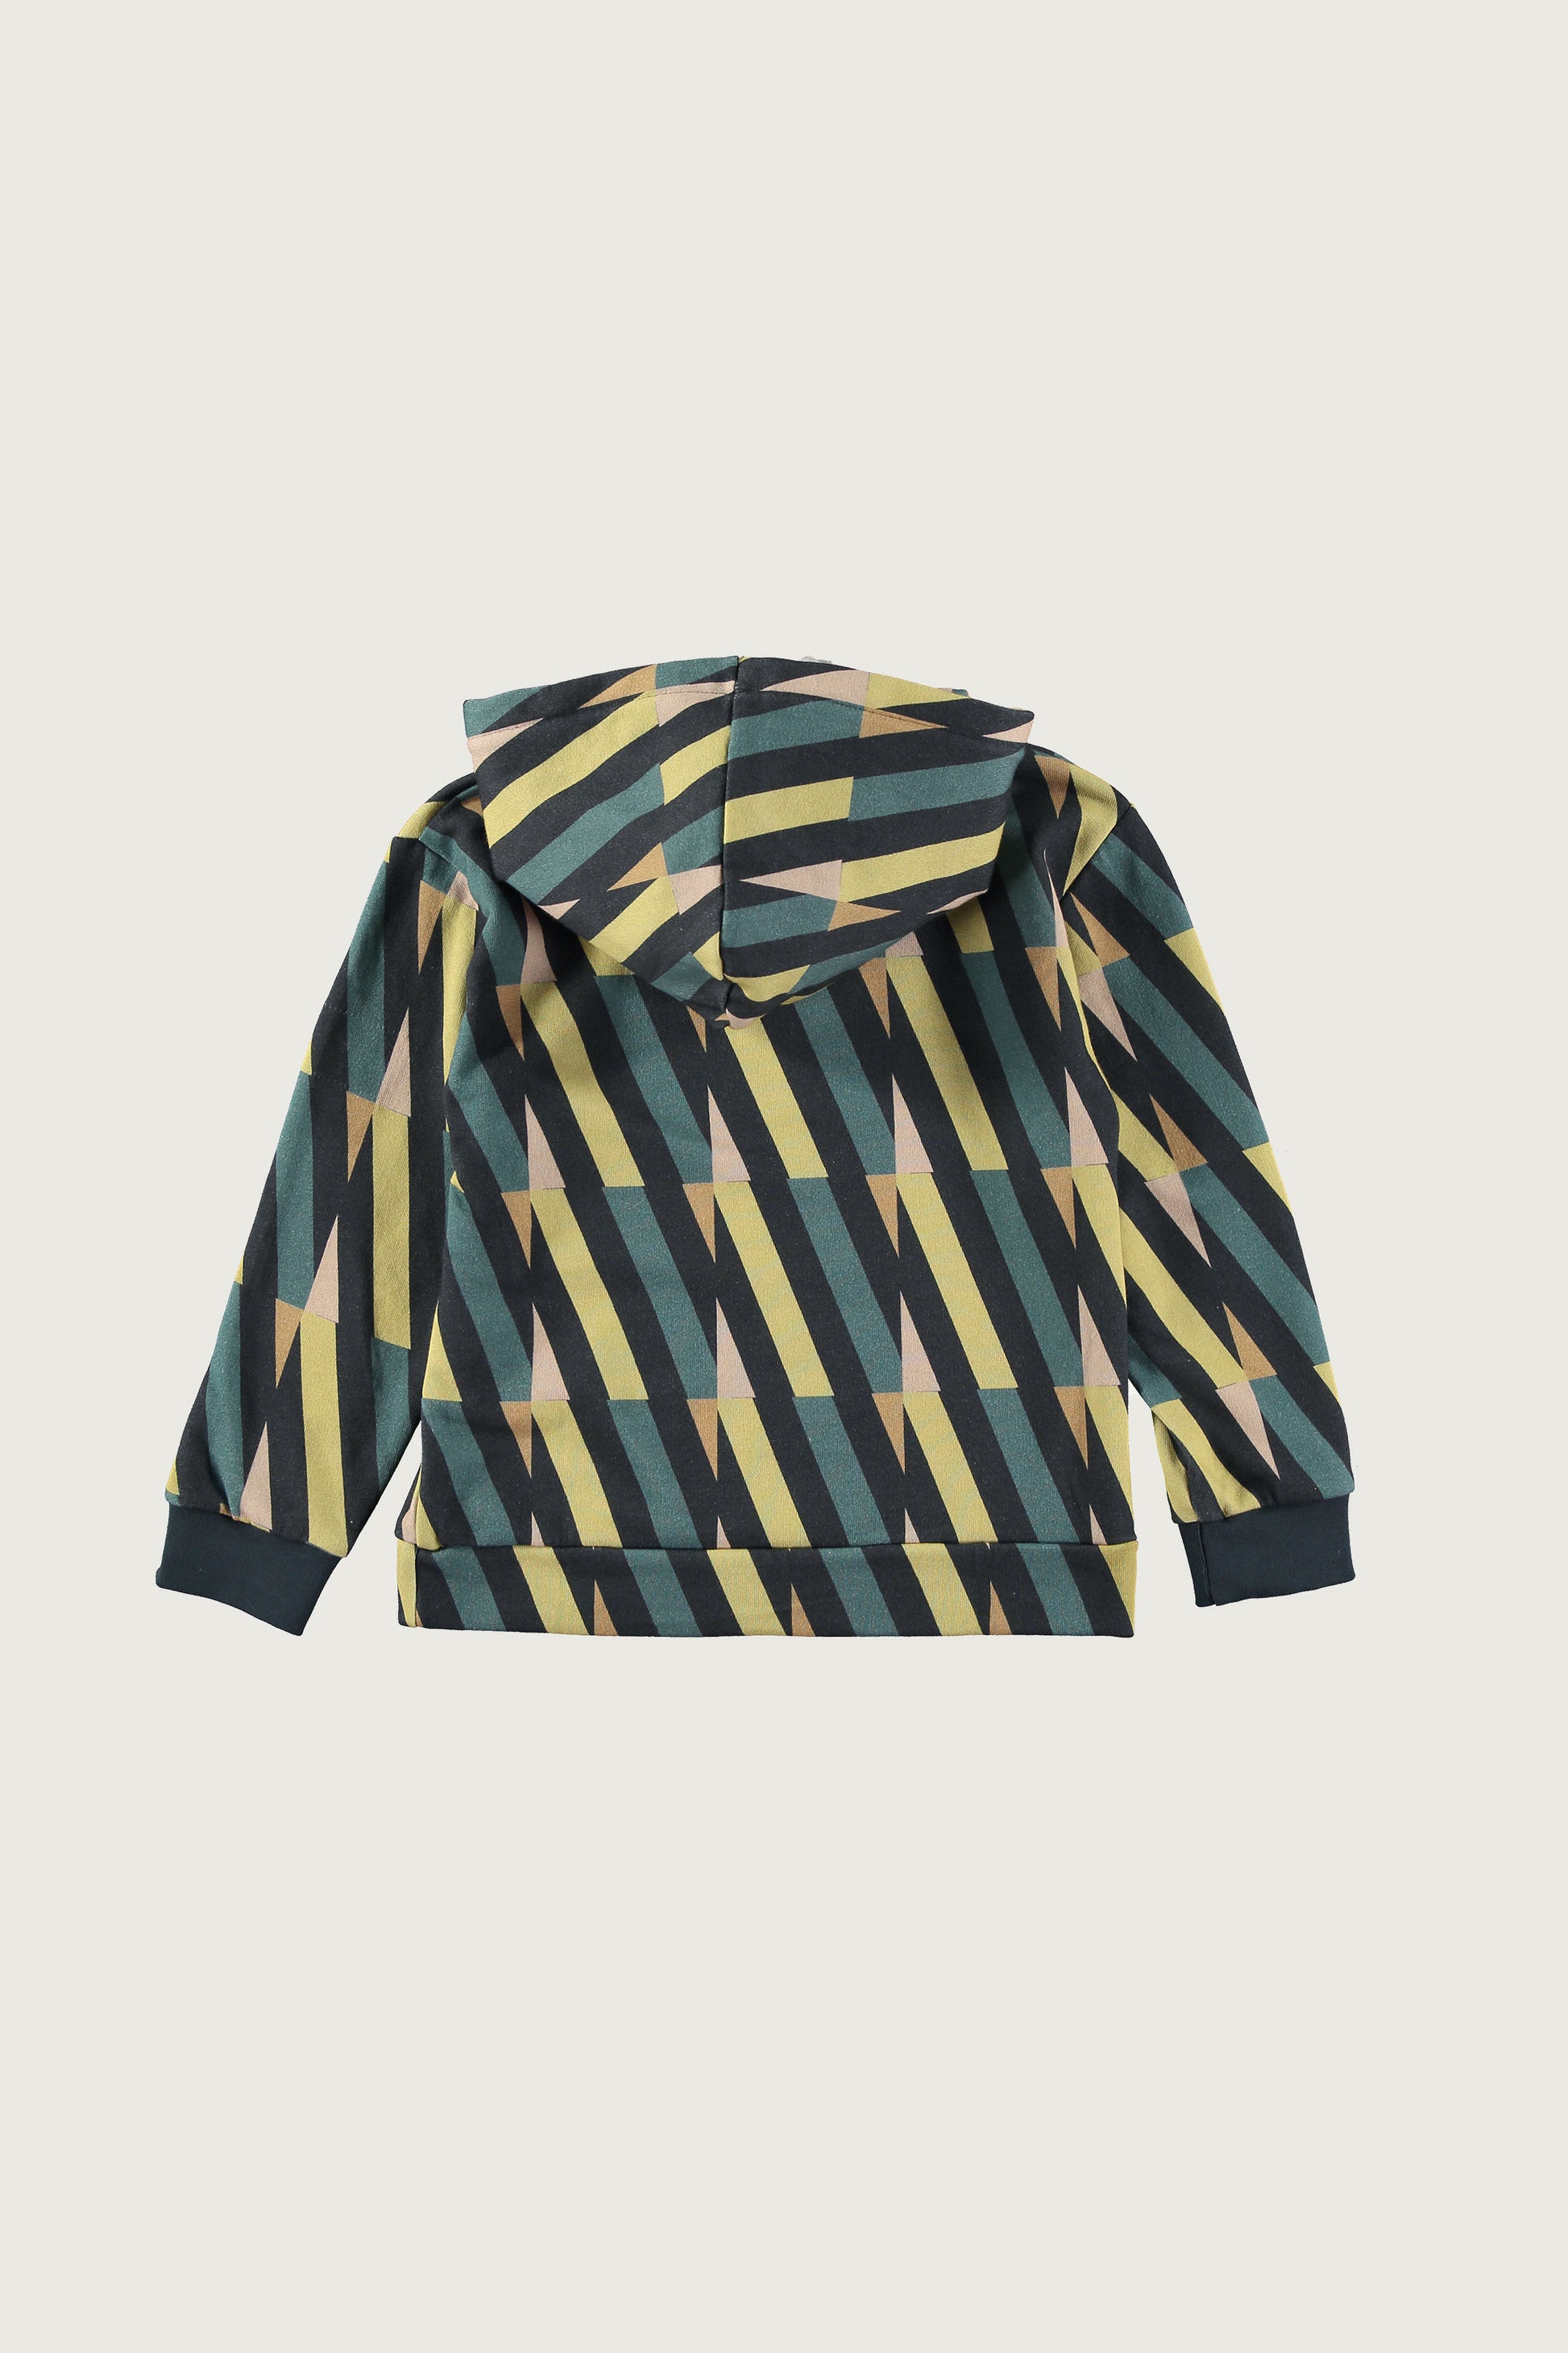 Coco Au Lait ABSTRACT LINES HOODIE  Abstract Lines